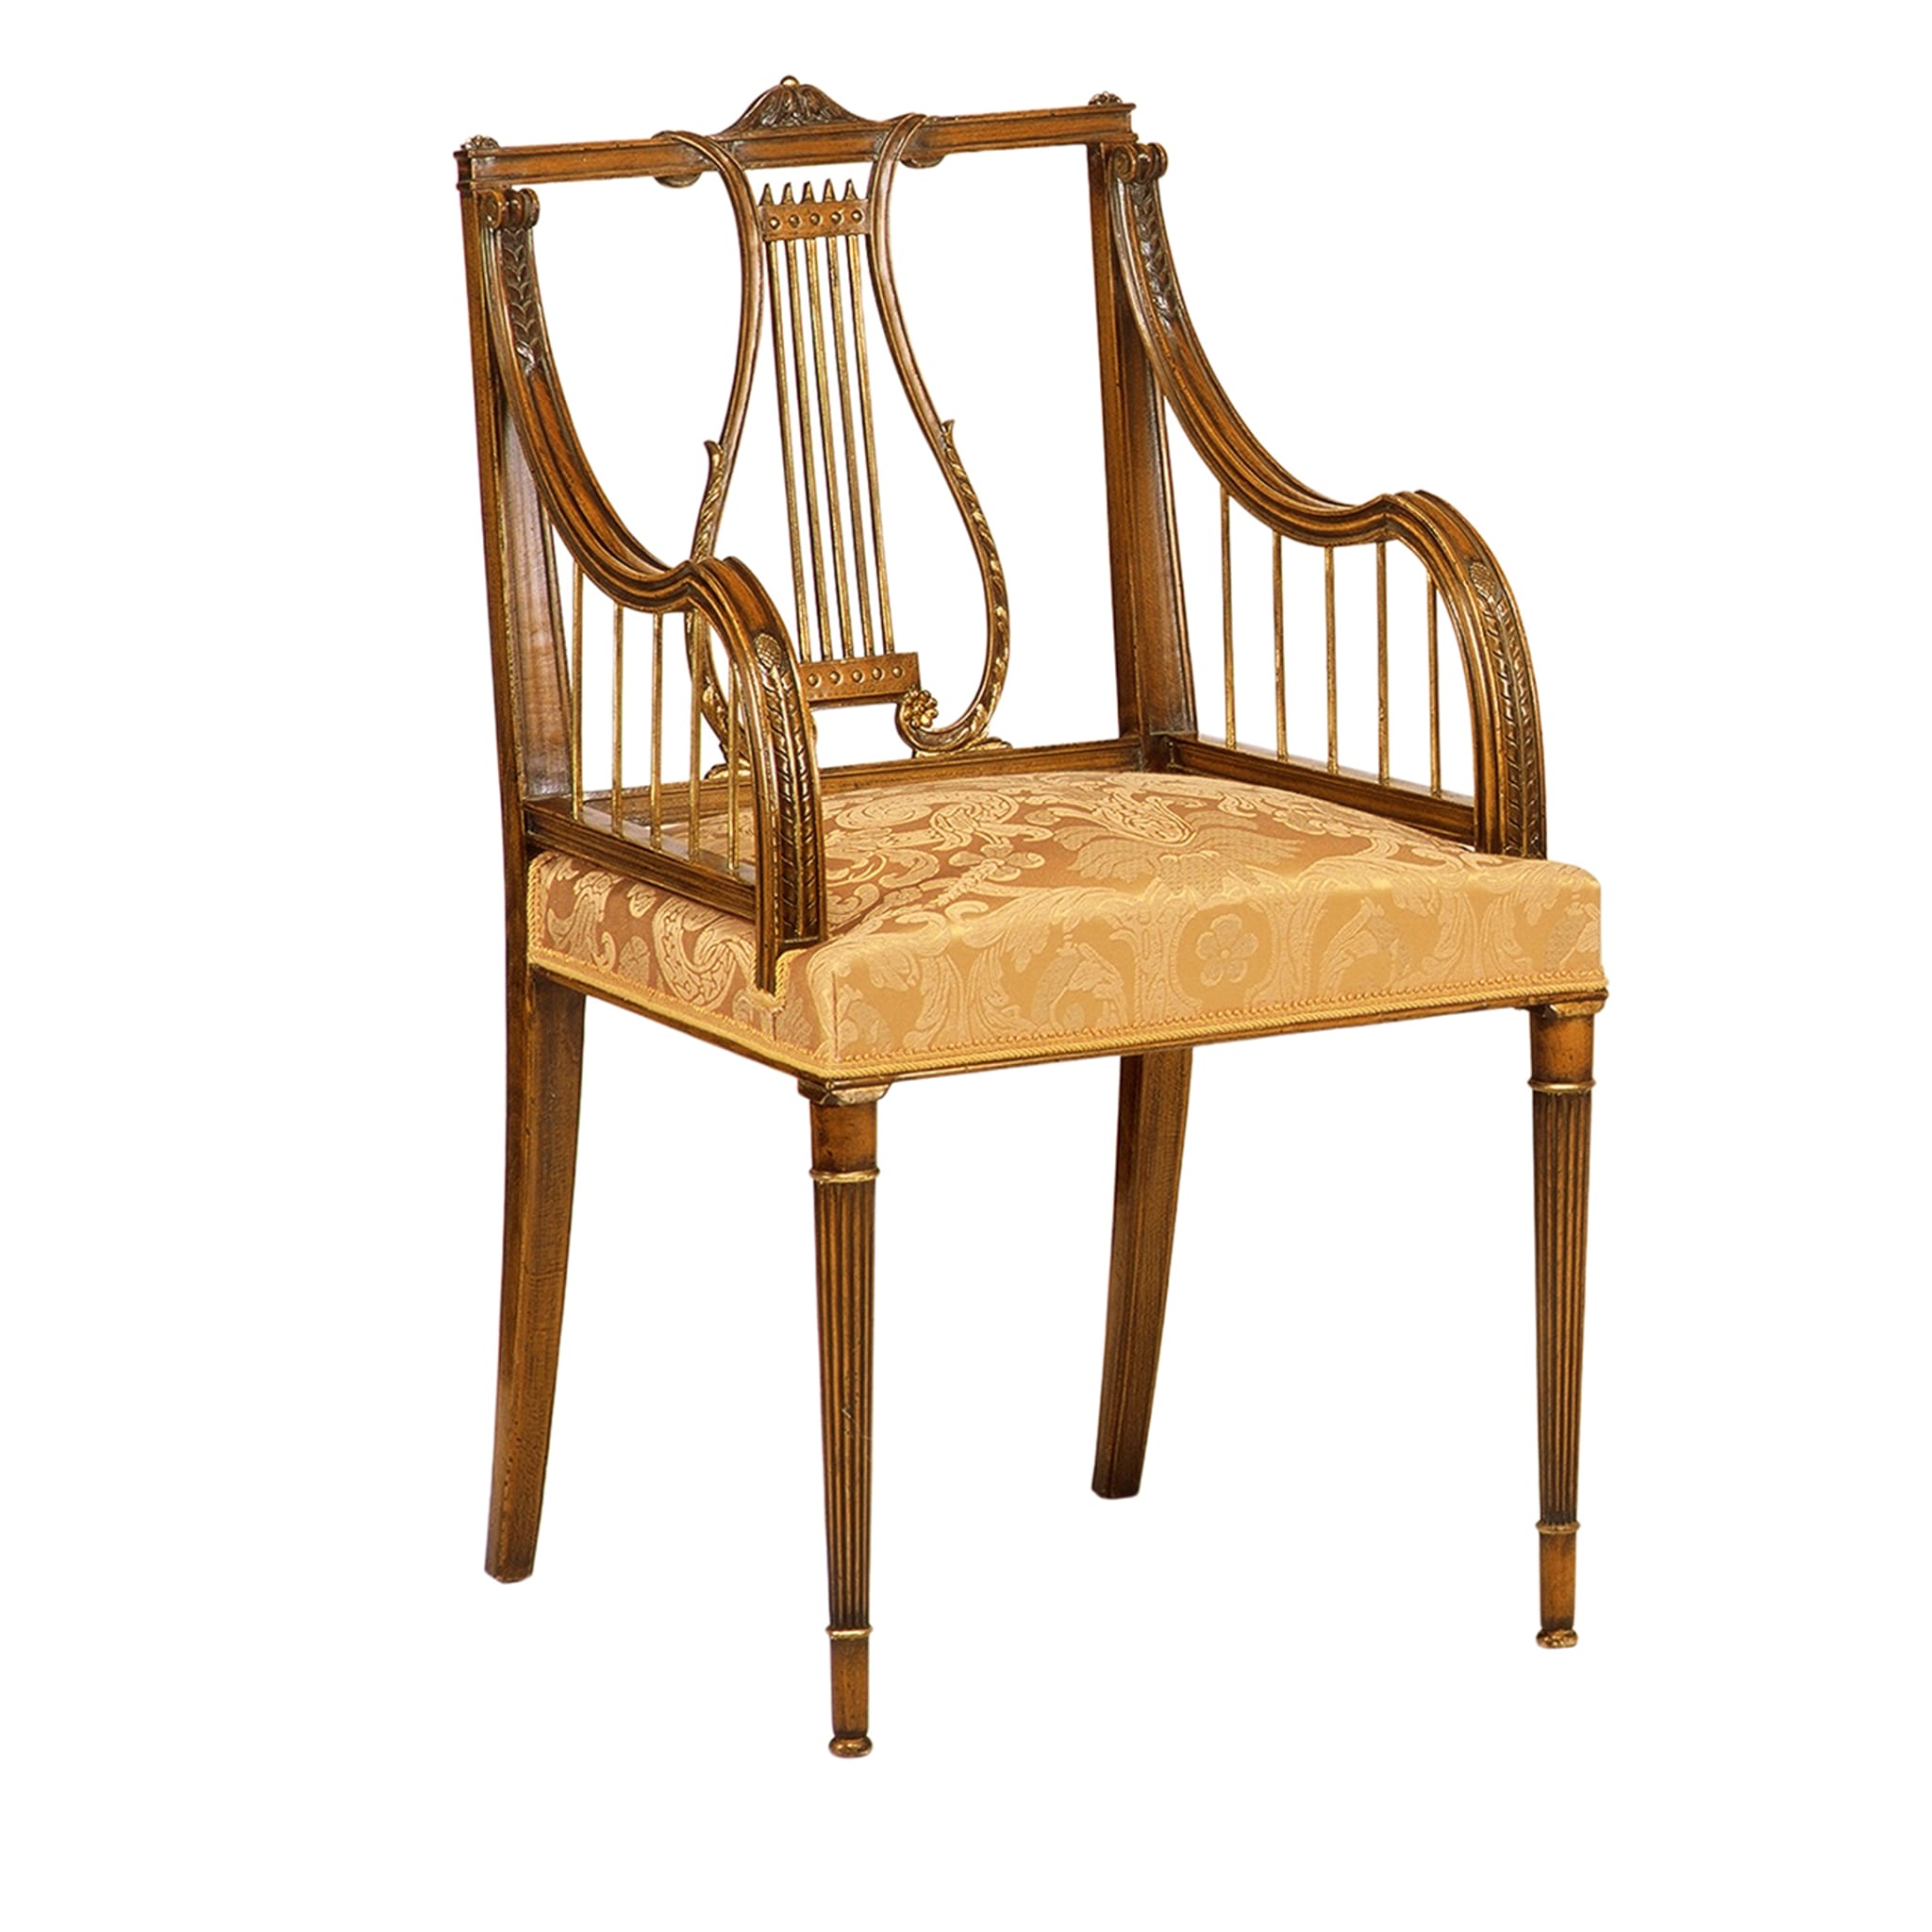 Hepplewhite-Style Lyre-Backrest Chair - Main view